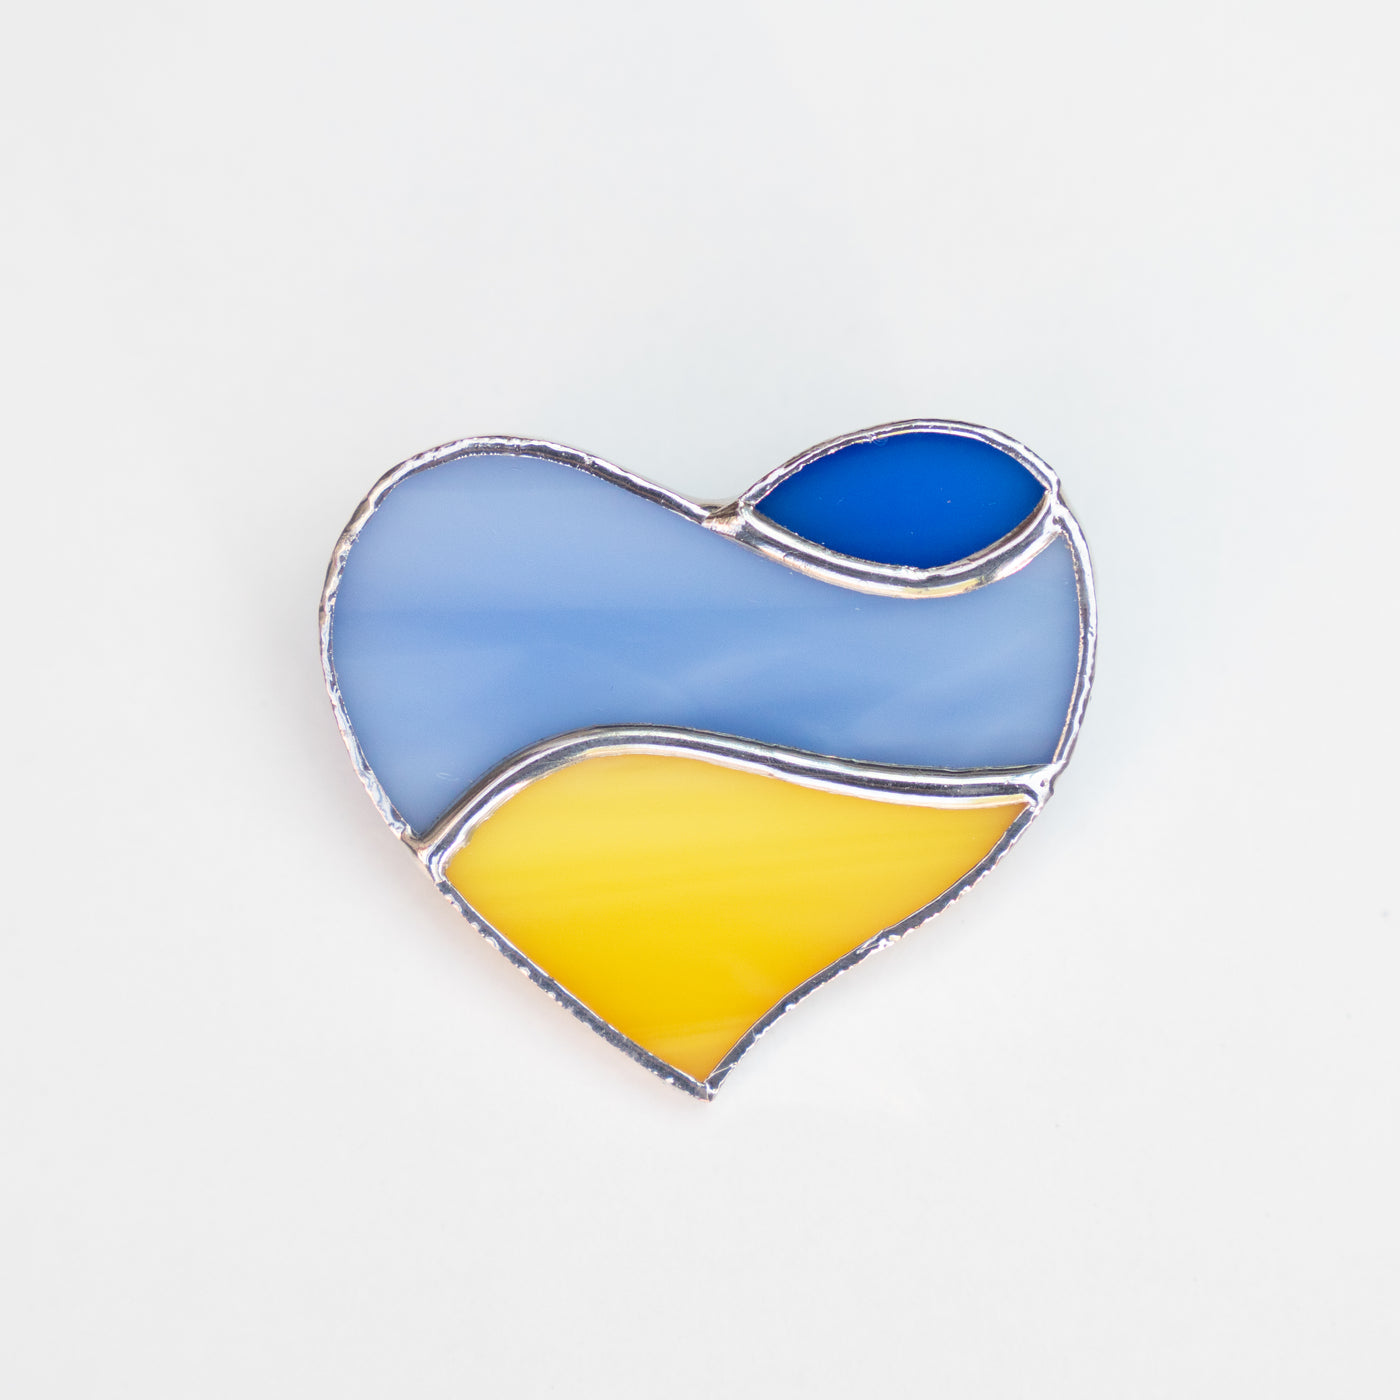 Stained glass heart brooch coloured like Ukrainian flag with light blue in the middle and royal blue above